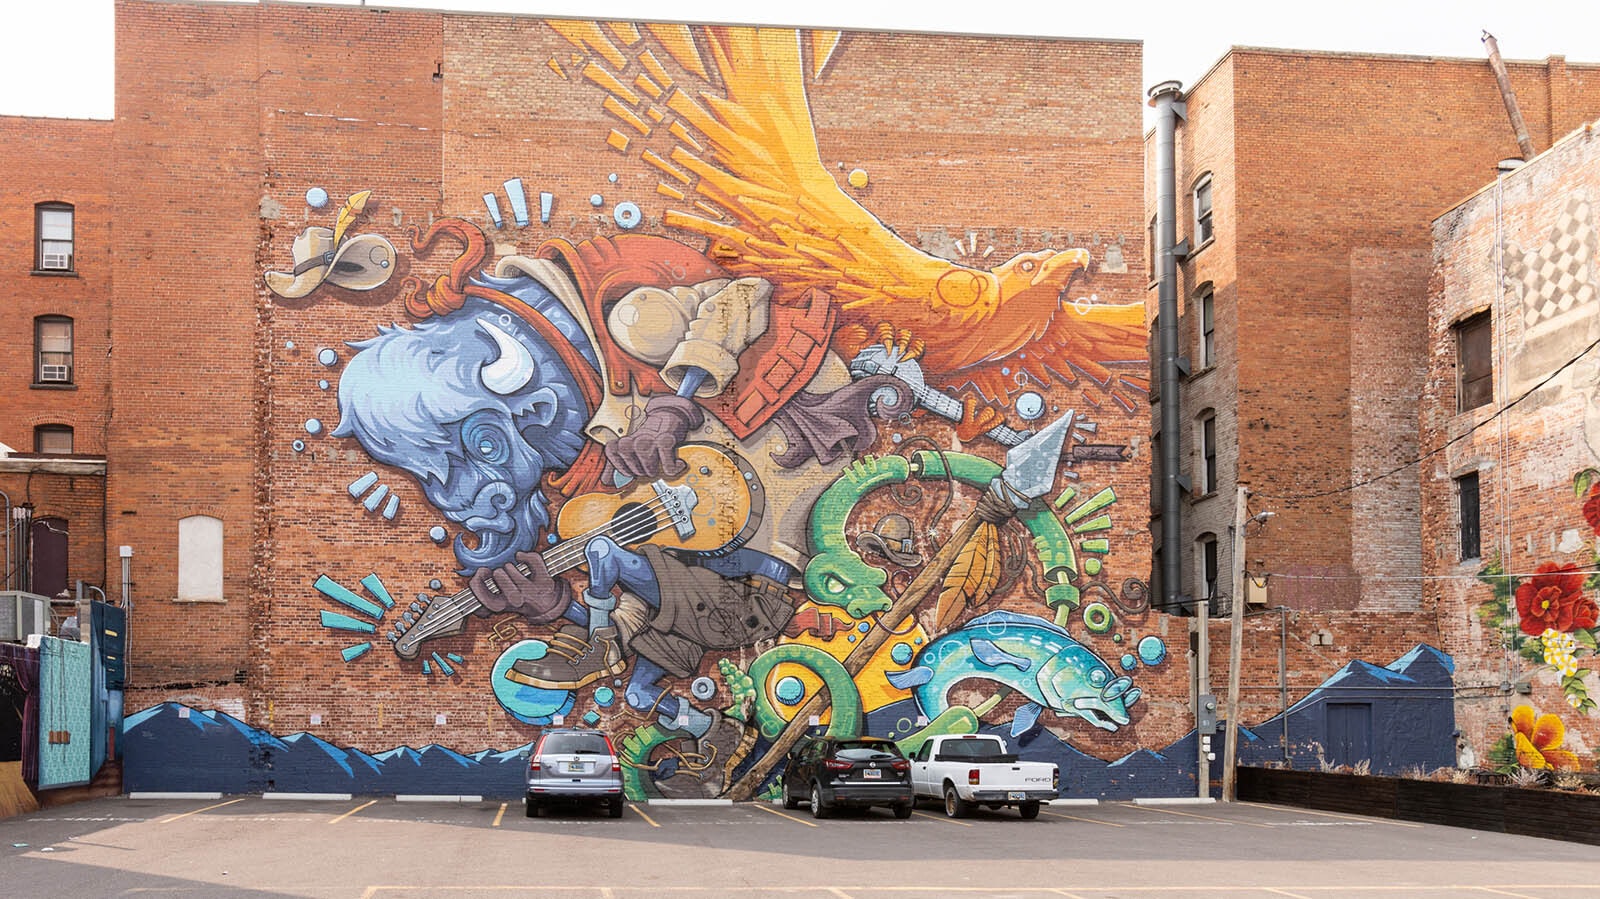 One of the murals in the alley behind the Paramount Café and Plains Hotel in downtown Cheyenne.